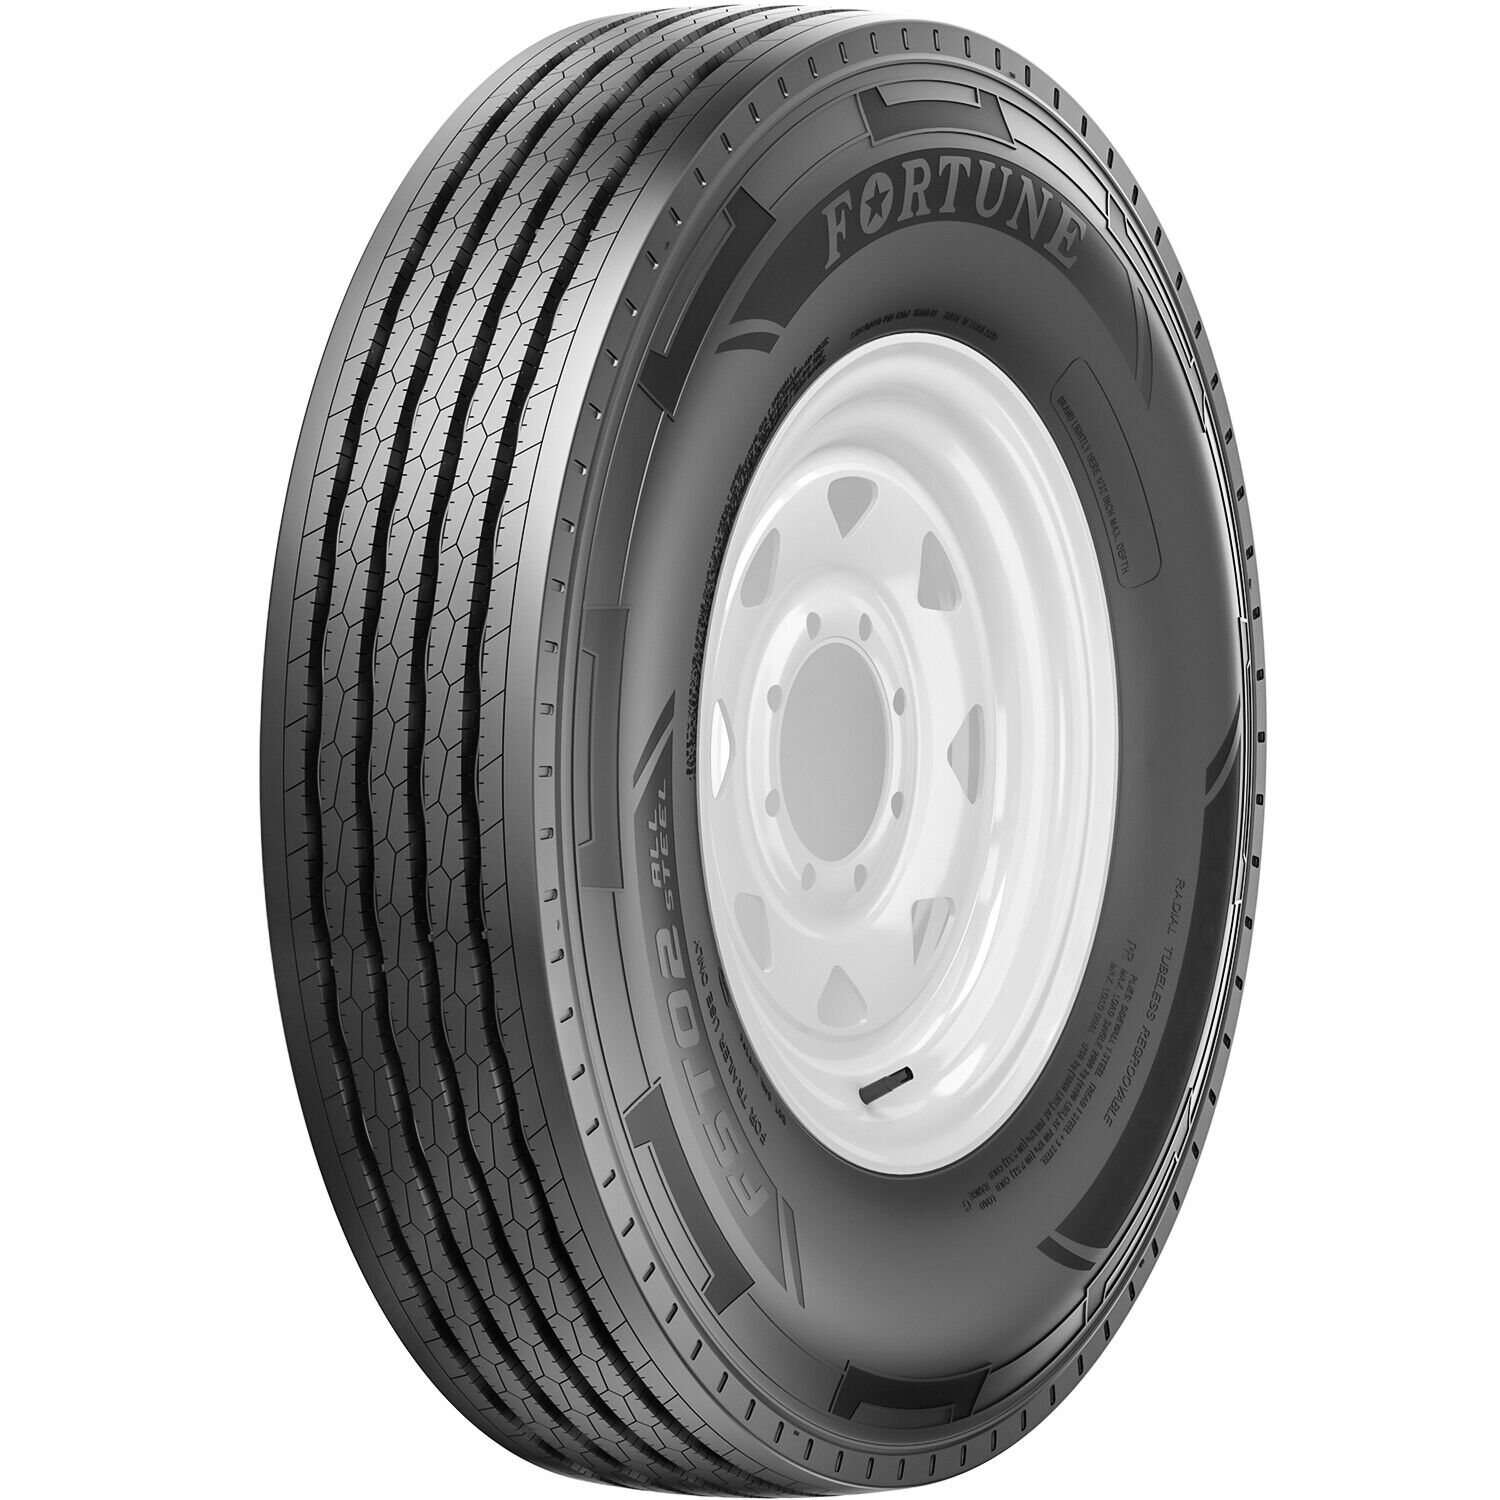 2 Tires Fortune FST02 All Steel ST 235/80R16 Load G 14 Ply Trailer